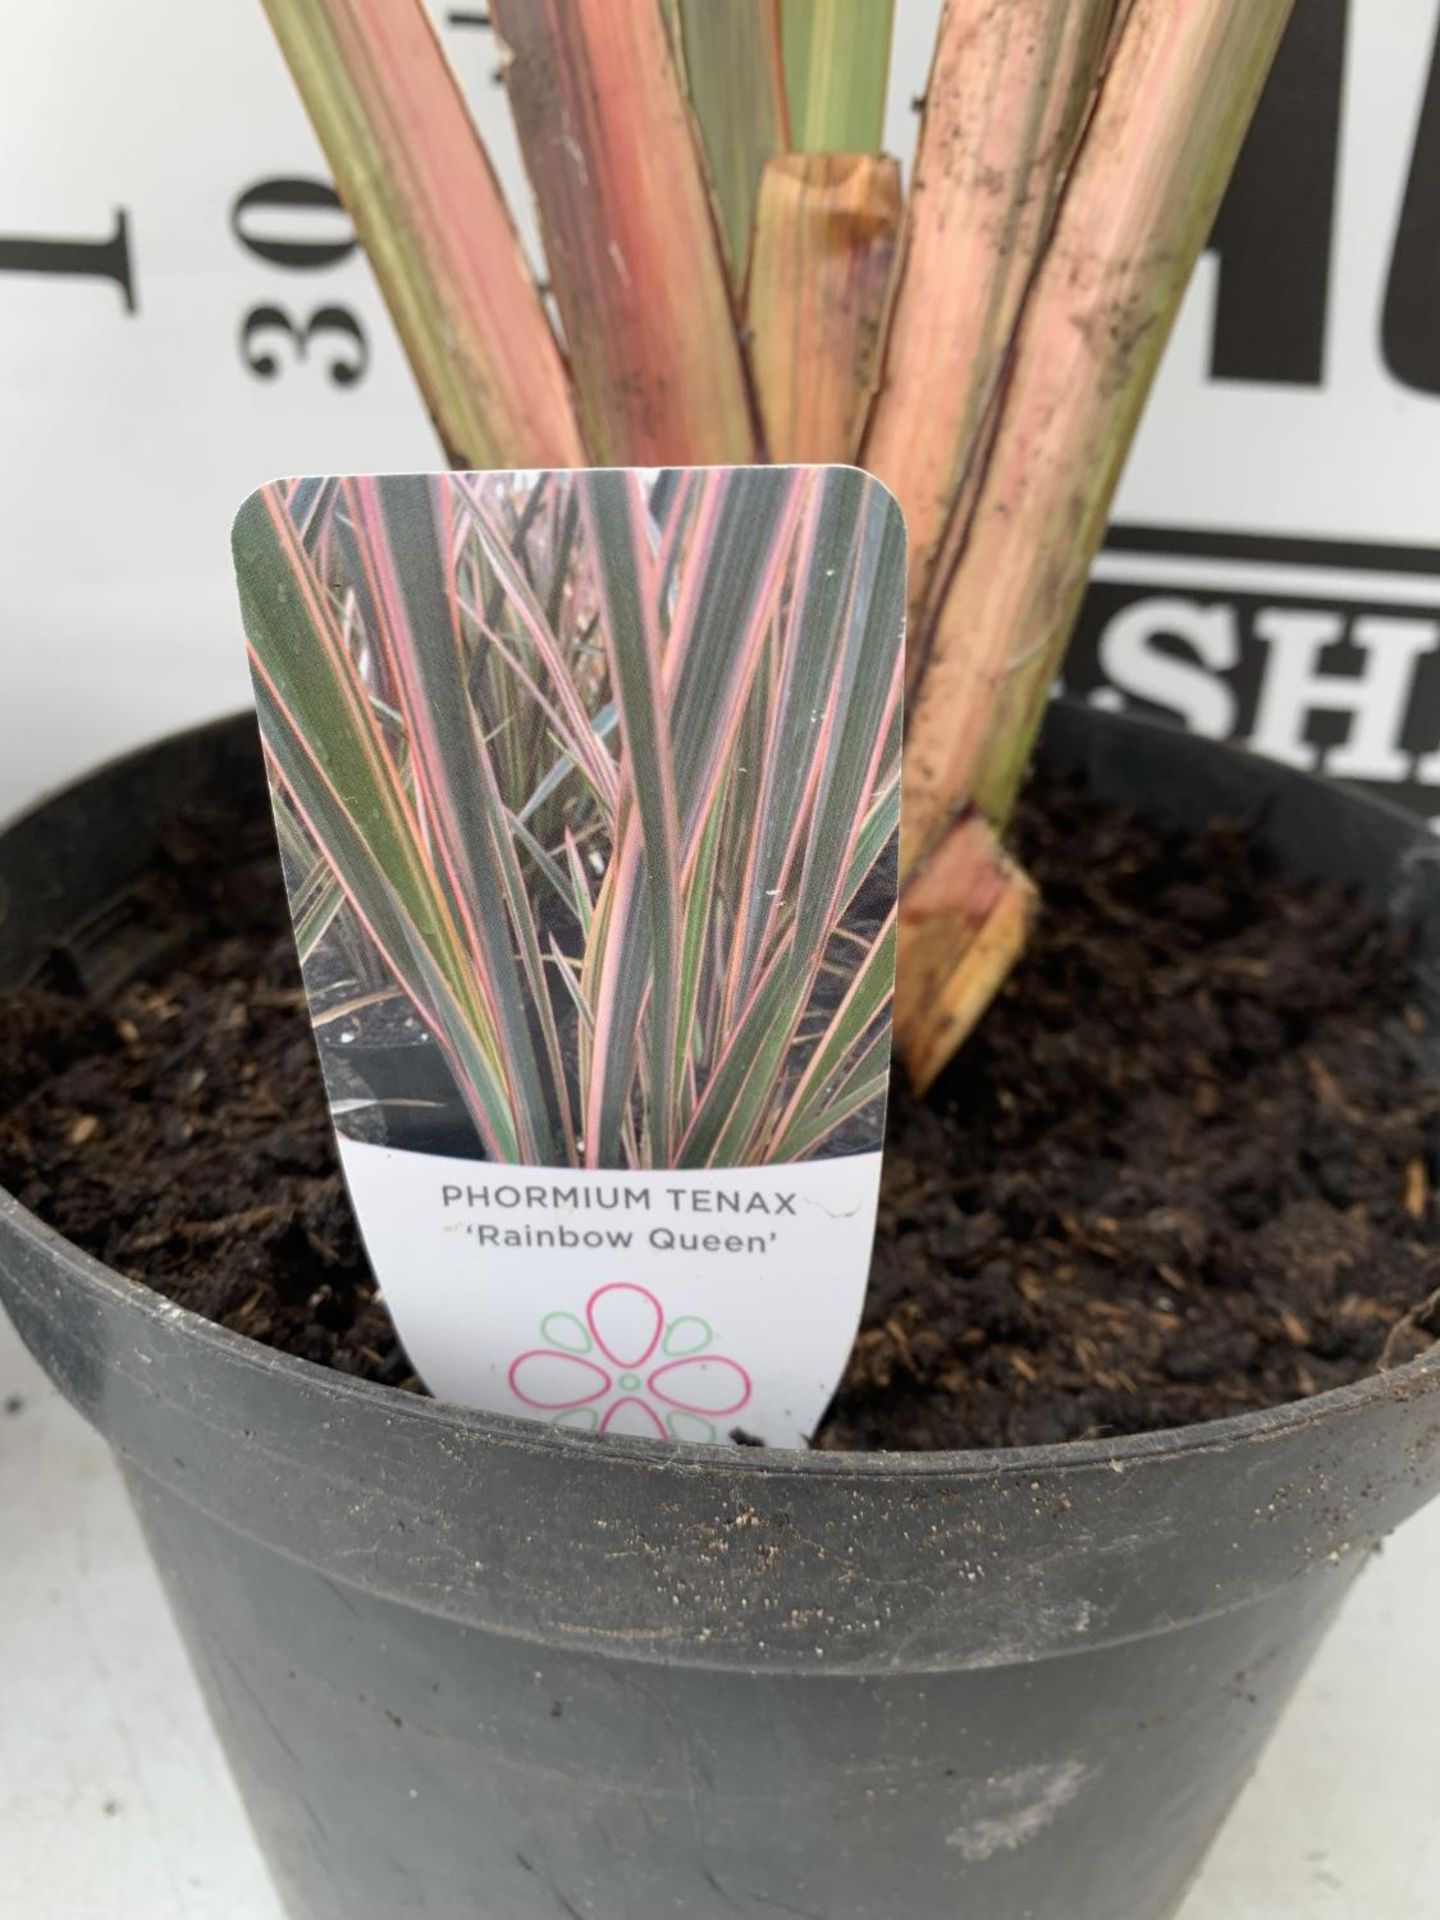 TWO PHORMIUM TENAX 'CREAM DELIGHT' AND 'RAINBOW QUEEN' APPROX 90CM IN HEIGHT IN 10 LTR POTS PLUS VAT - Image 4 of 5